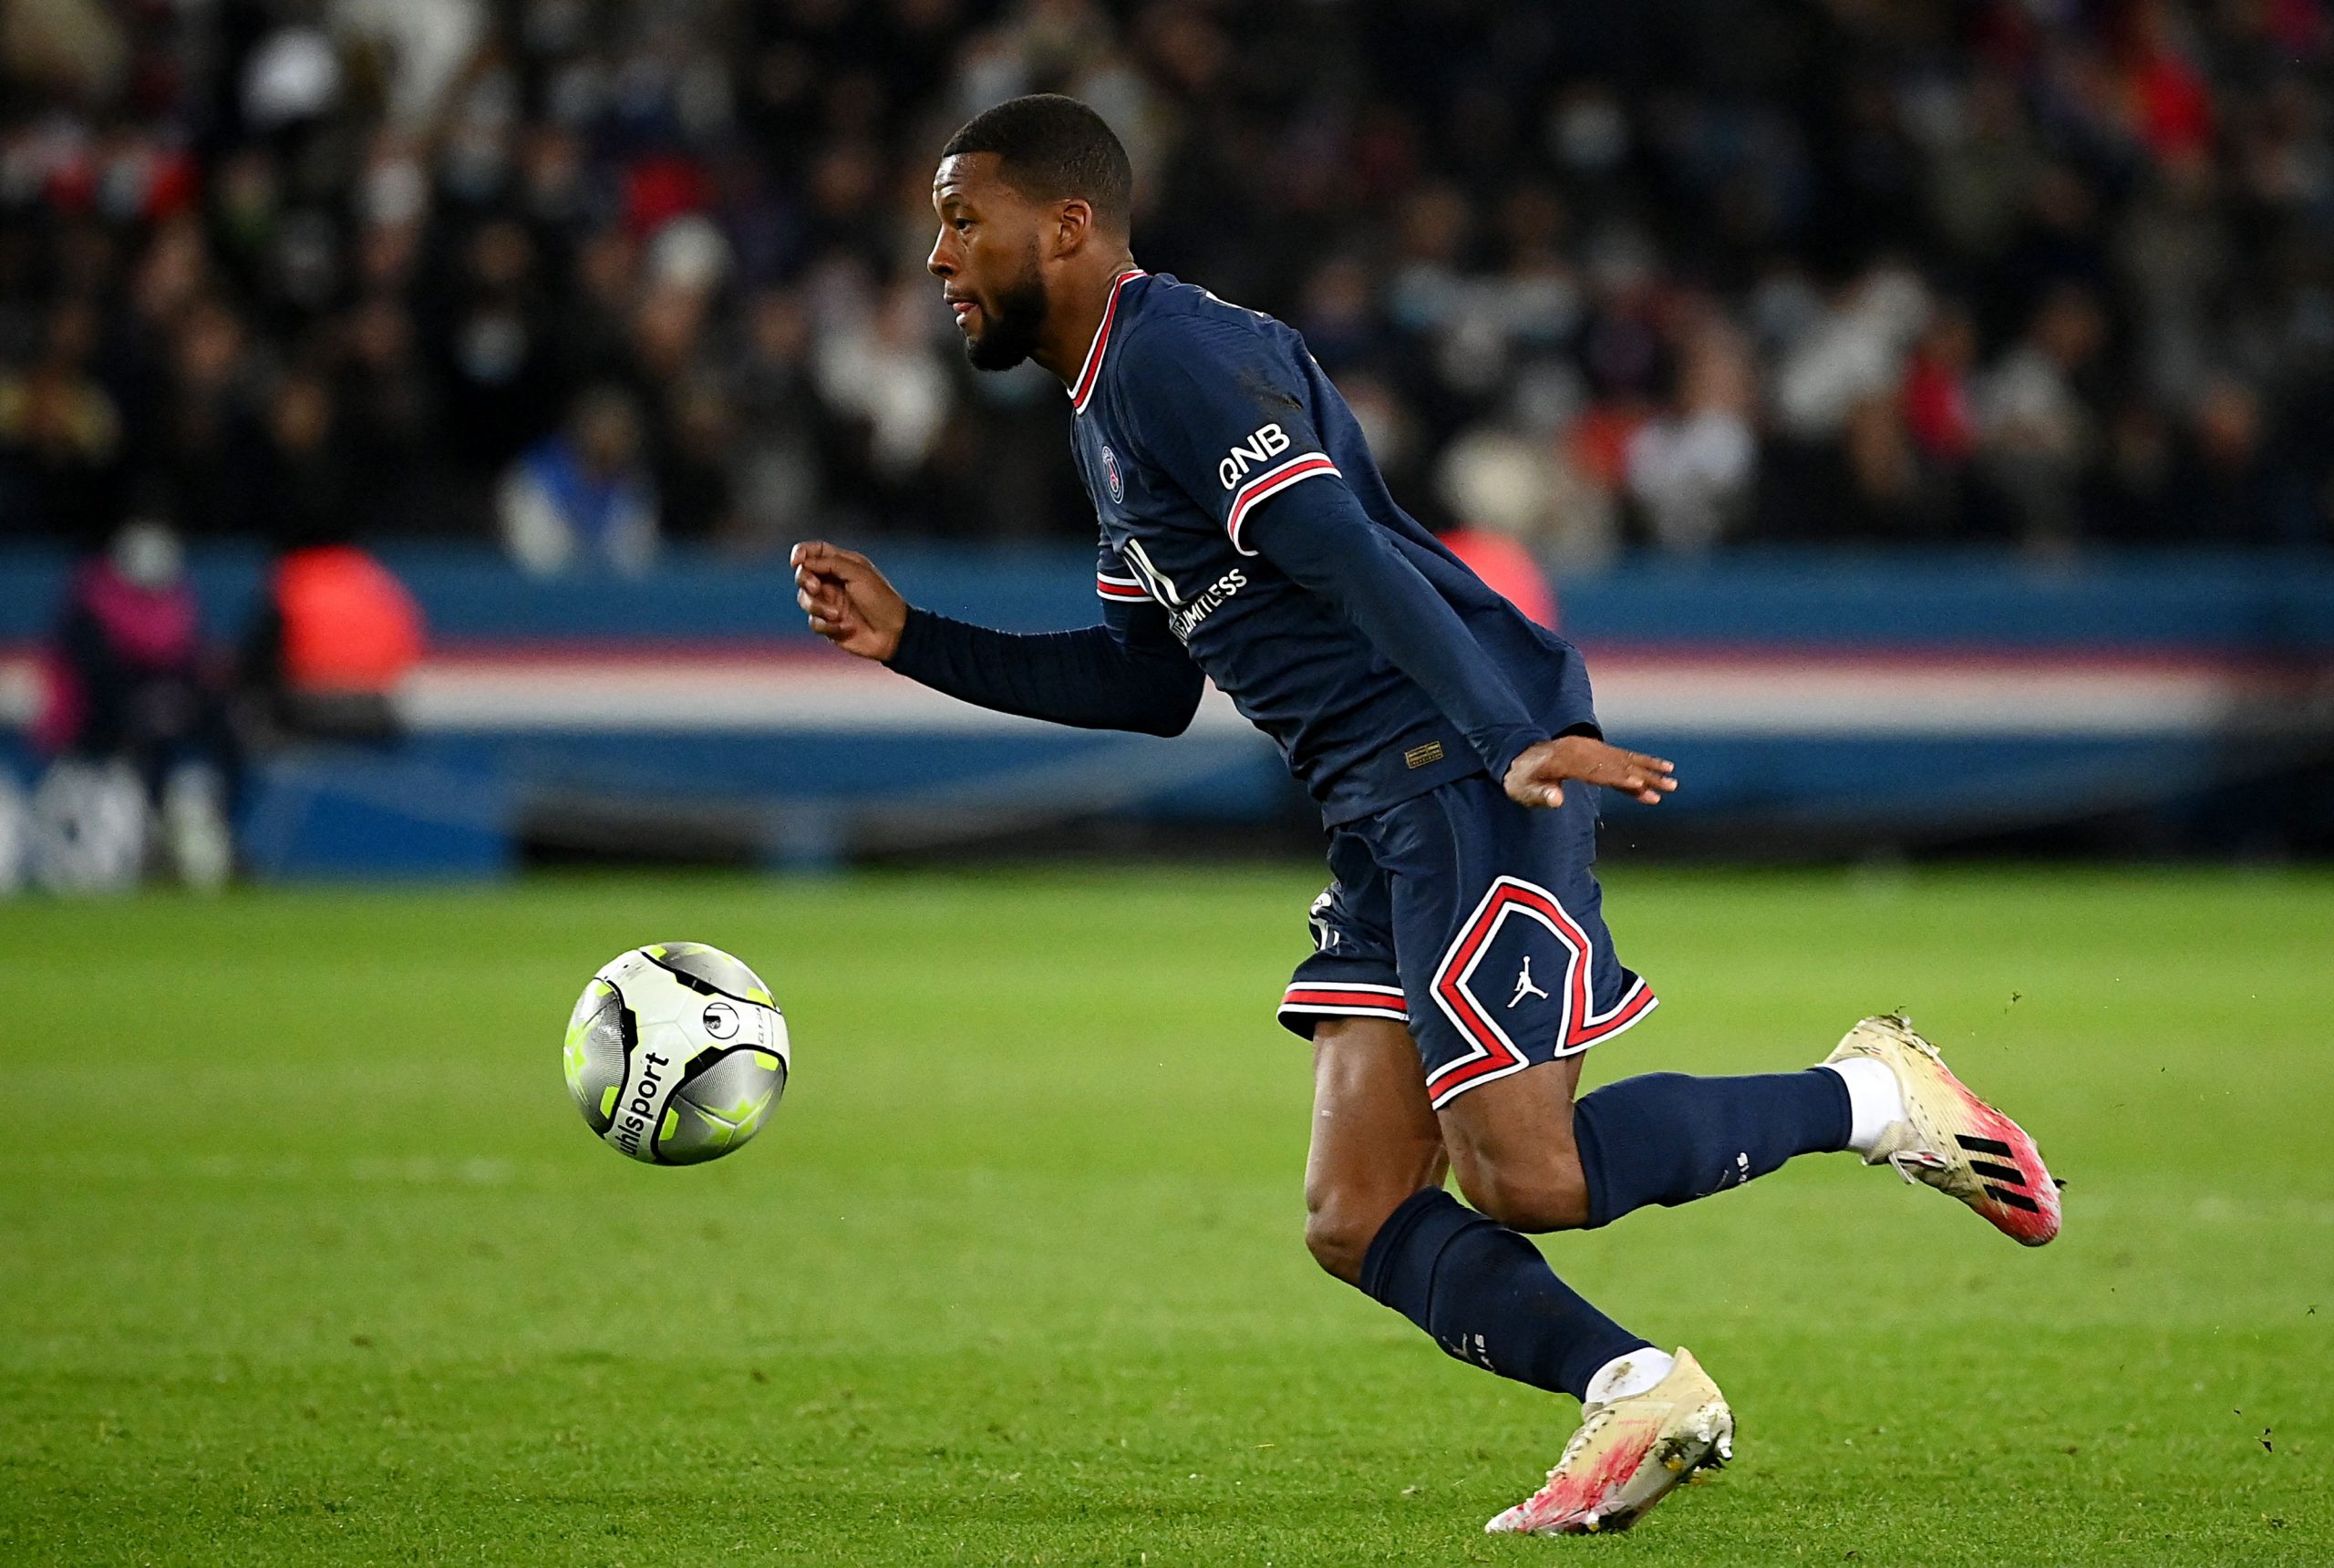 Paris Saint-Germain's Dutch midfielder Georginio Wijnaldum runs with the ball during the French L1 football match between Paris-Saint Germain (PSG) and Saint-Etienne (ASSE) at The Parc des Princes Stadium in Paris on February 26, 2022. (Photo by FRANCK FIFE / AFP) (Photo by FRANCK FIFE/AFP via Getty Images)The 4th Official uses images provided by the following image agency: Getty Images (https://www.gettyimages.de/) Imago Images (https://www.imago-images.de/)